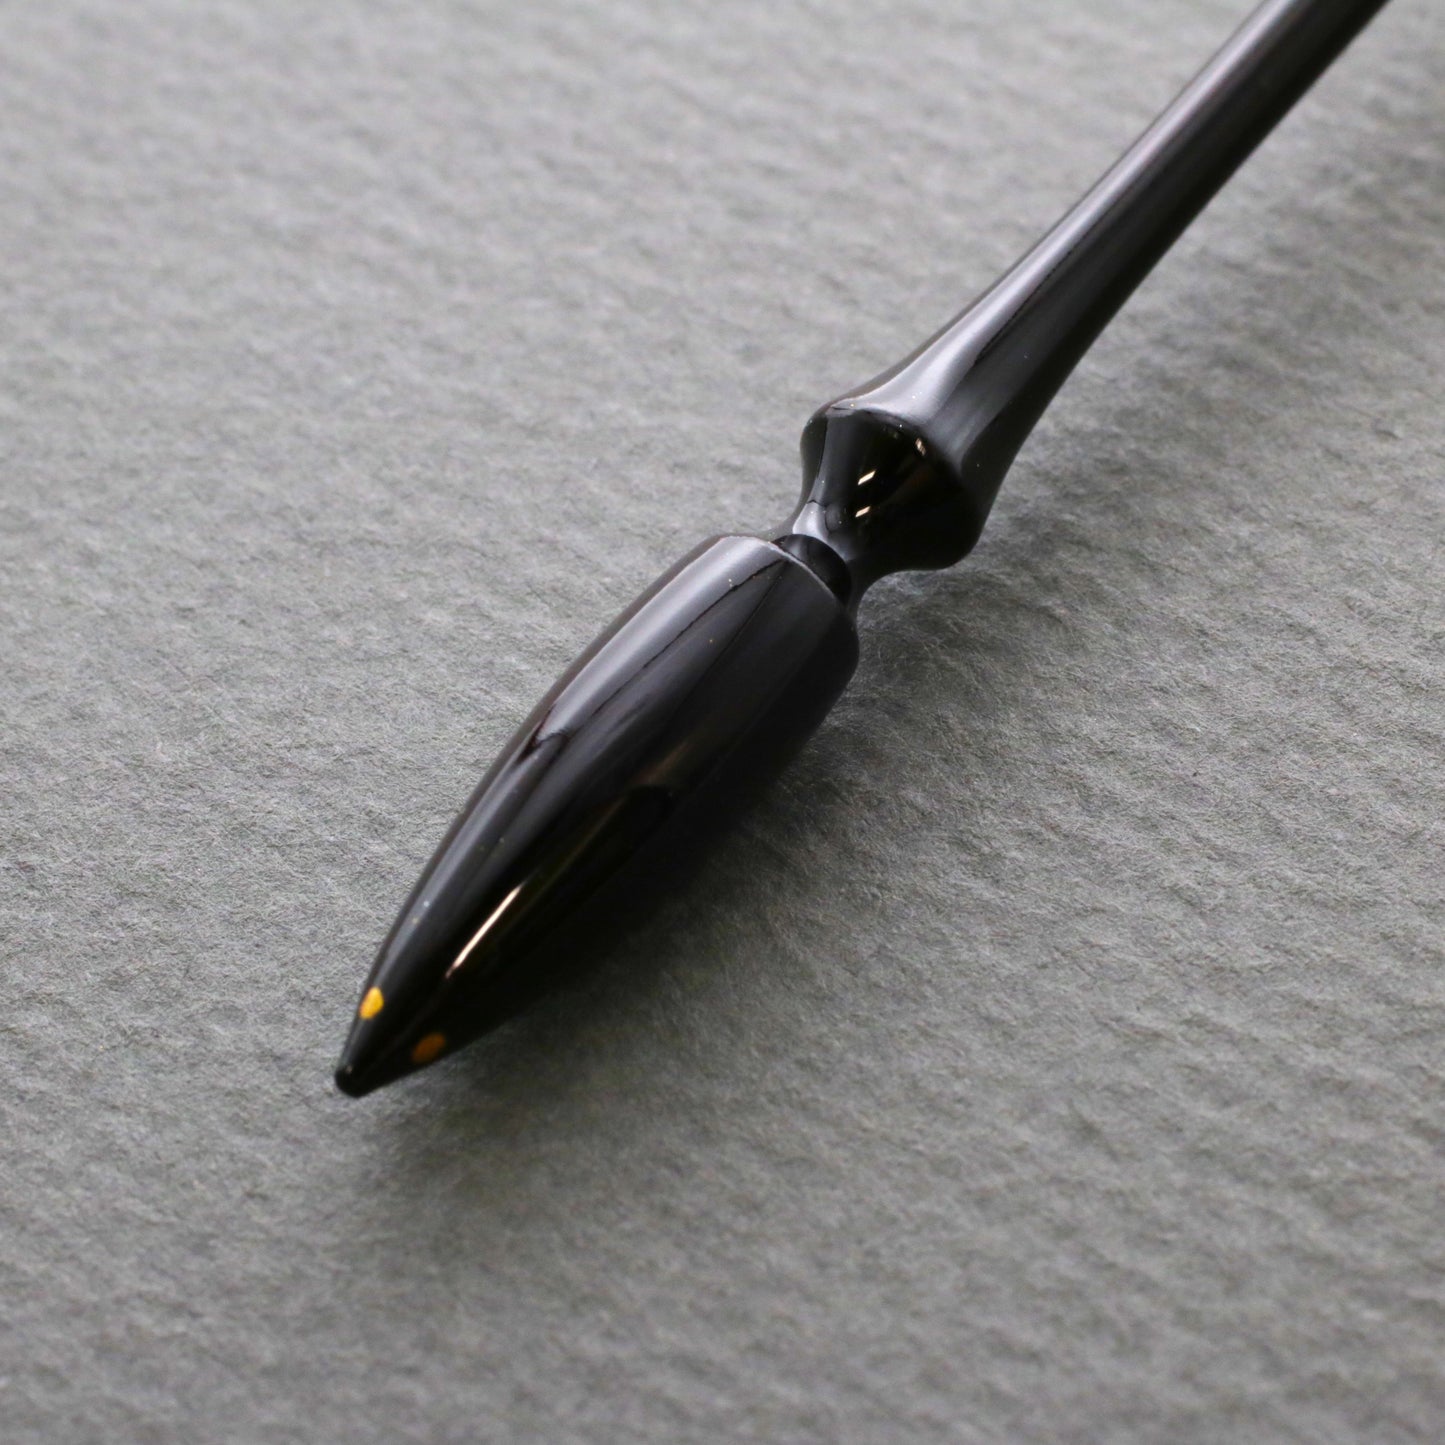 TACT Straight Nib Holder by yurie